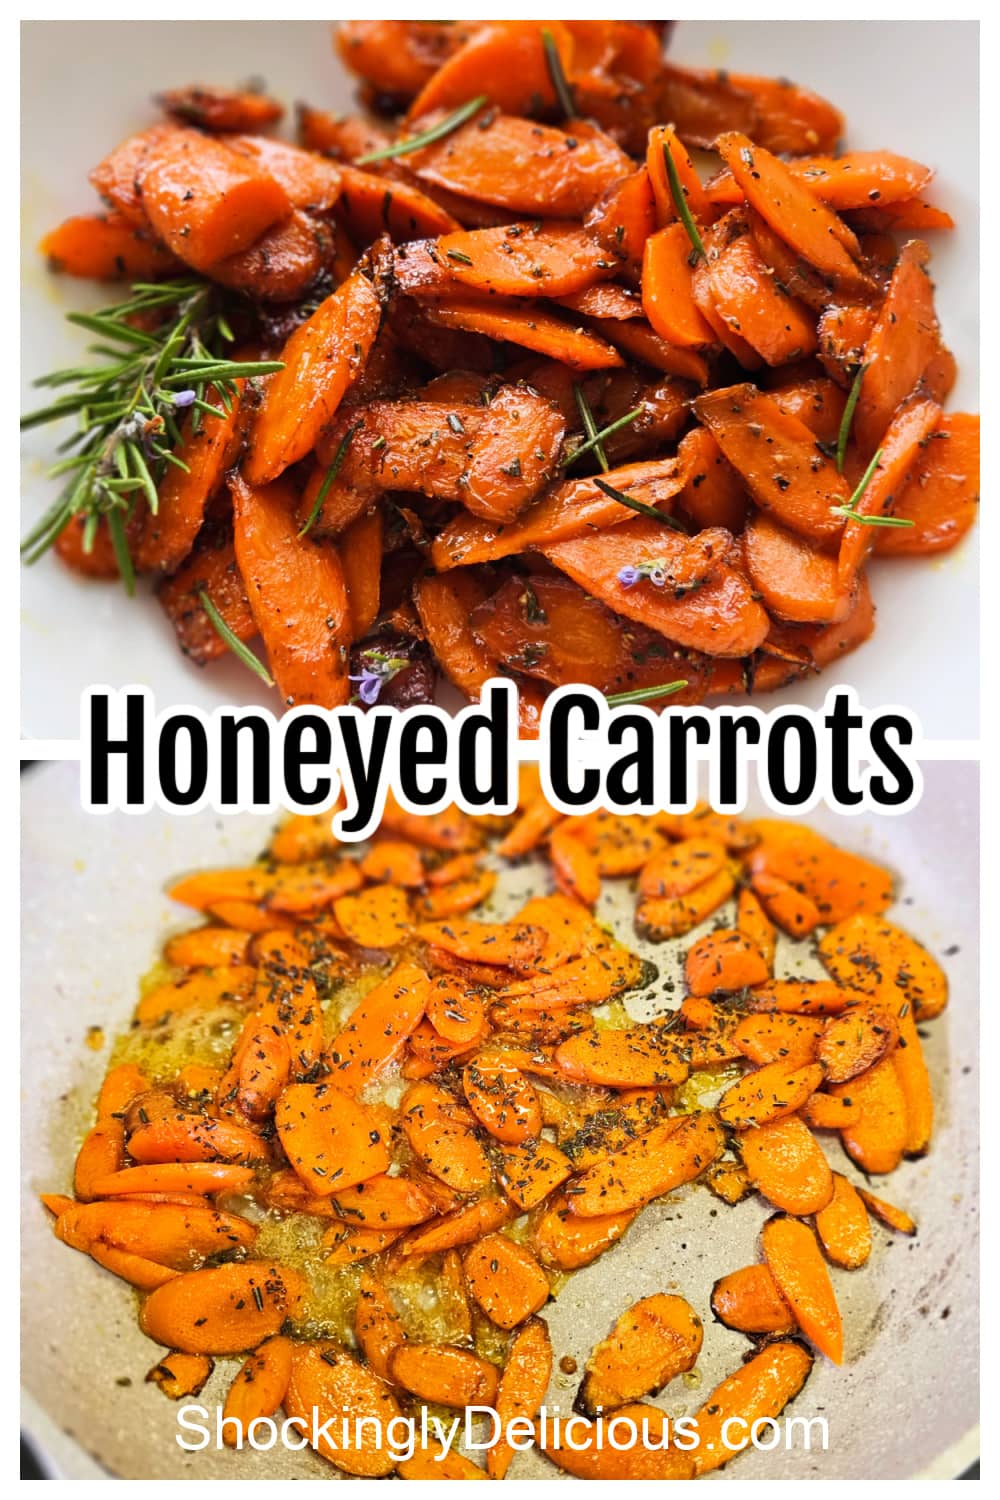 2 photos of Honeyed Carrots, one in white bowl on top, one cooking in light skillet on bottom.